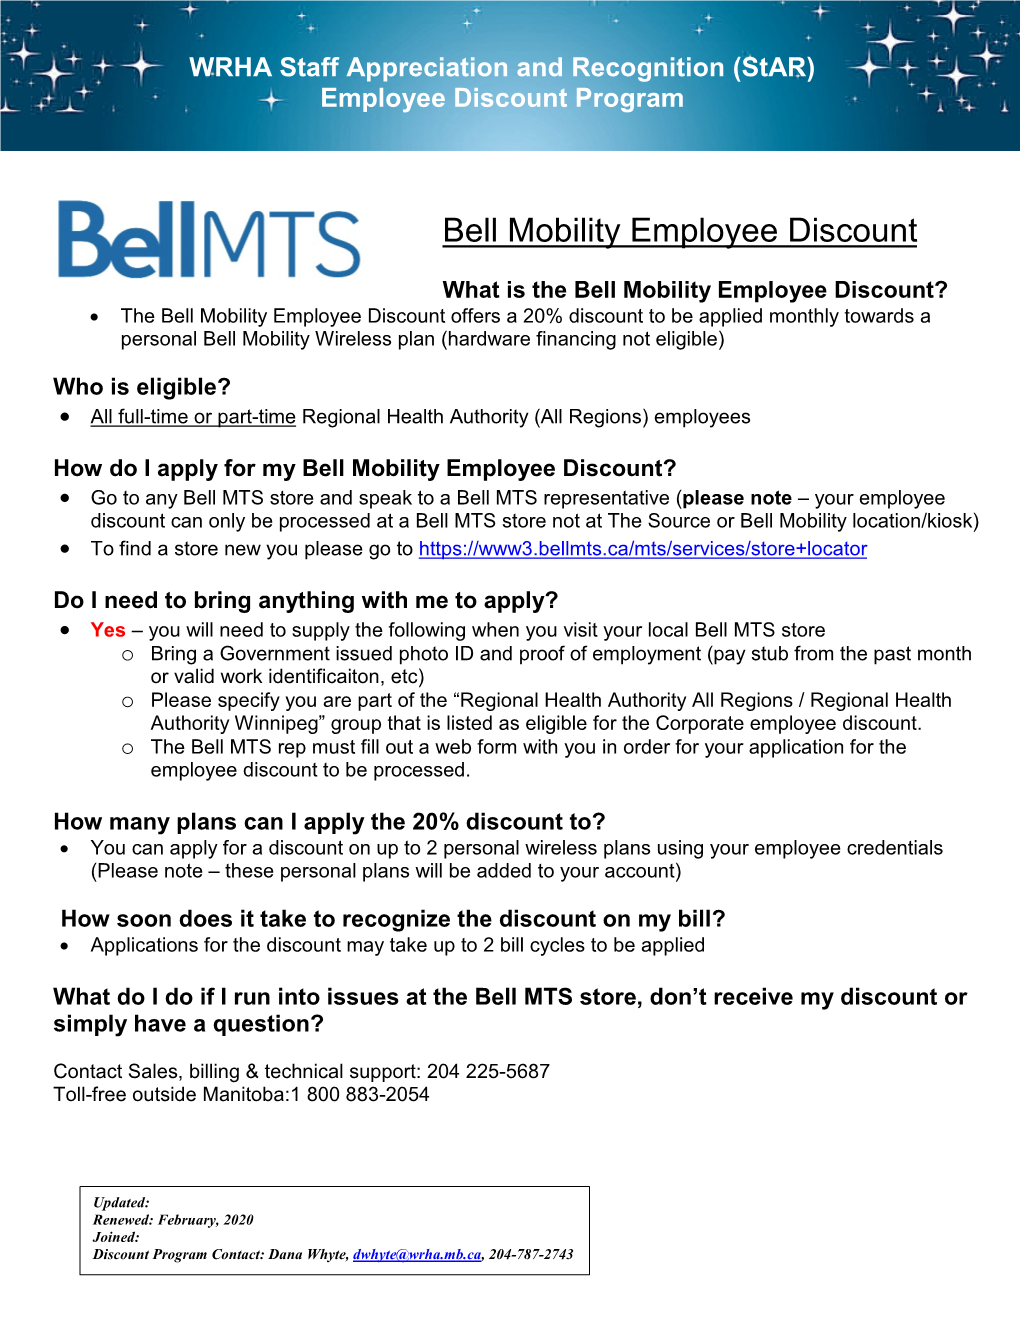 Bell Mobility Employee Discount